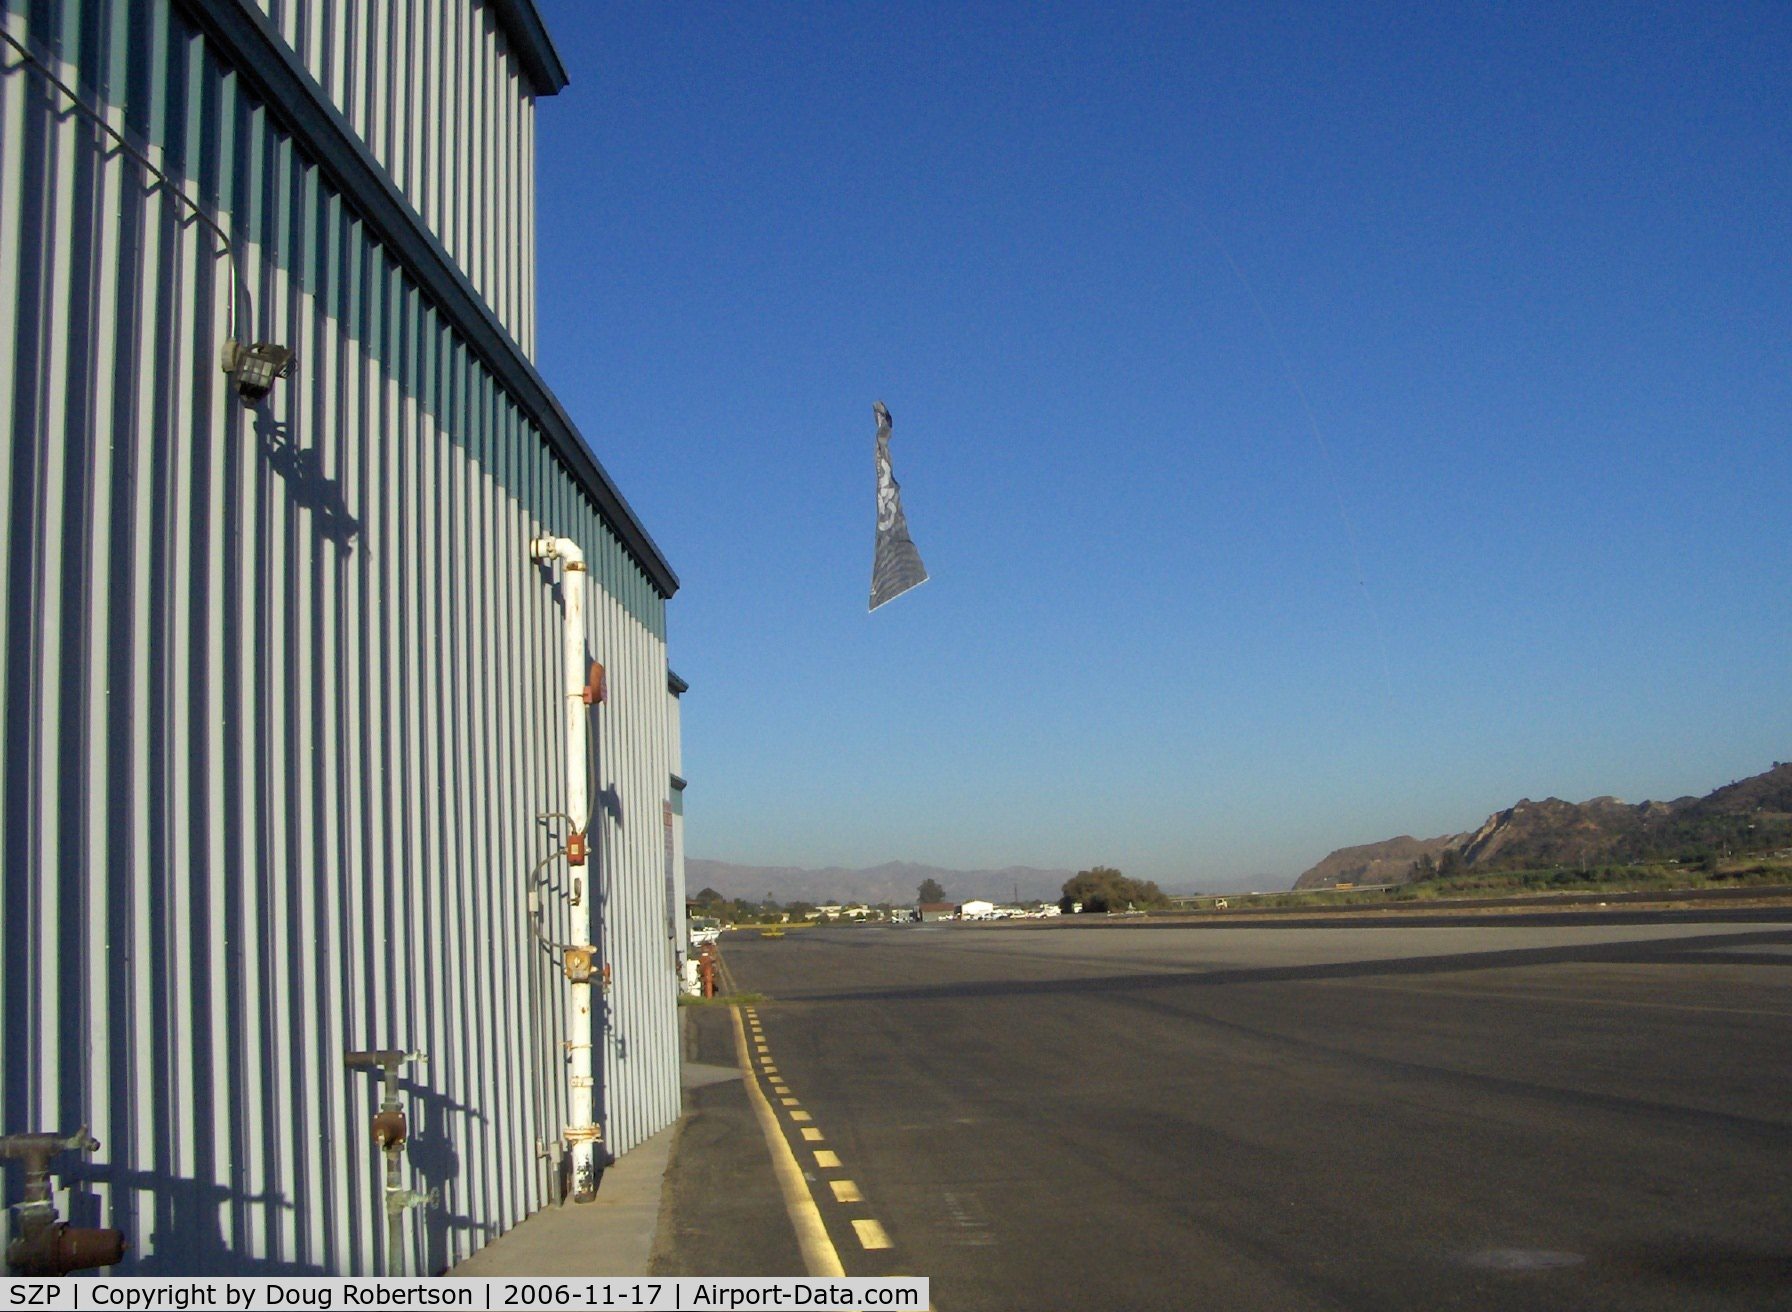 Santa Paula Airport (SZP) - Banner Tow Release/Drop over taxiway by N3042M Piper Super Cruiser with 180 Hp, Note the taxying aircraft-usually the drop is on other side of Runway 22